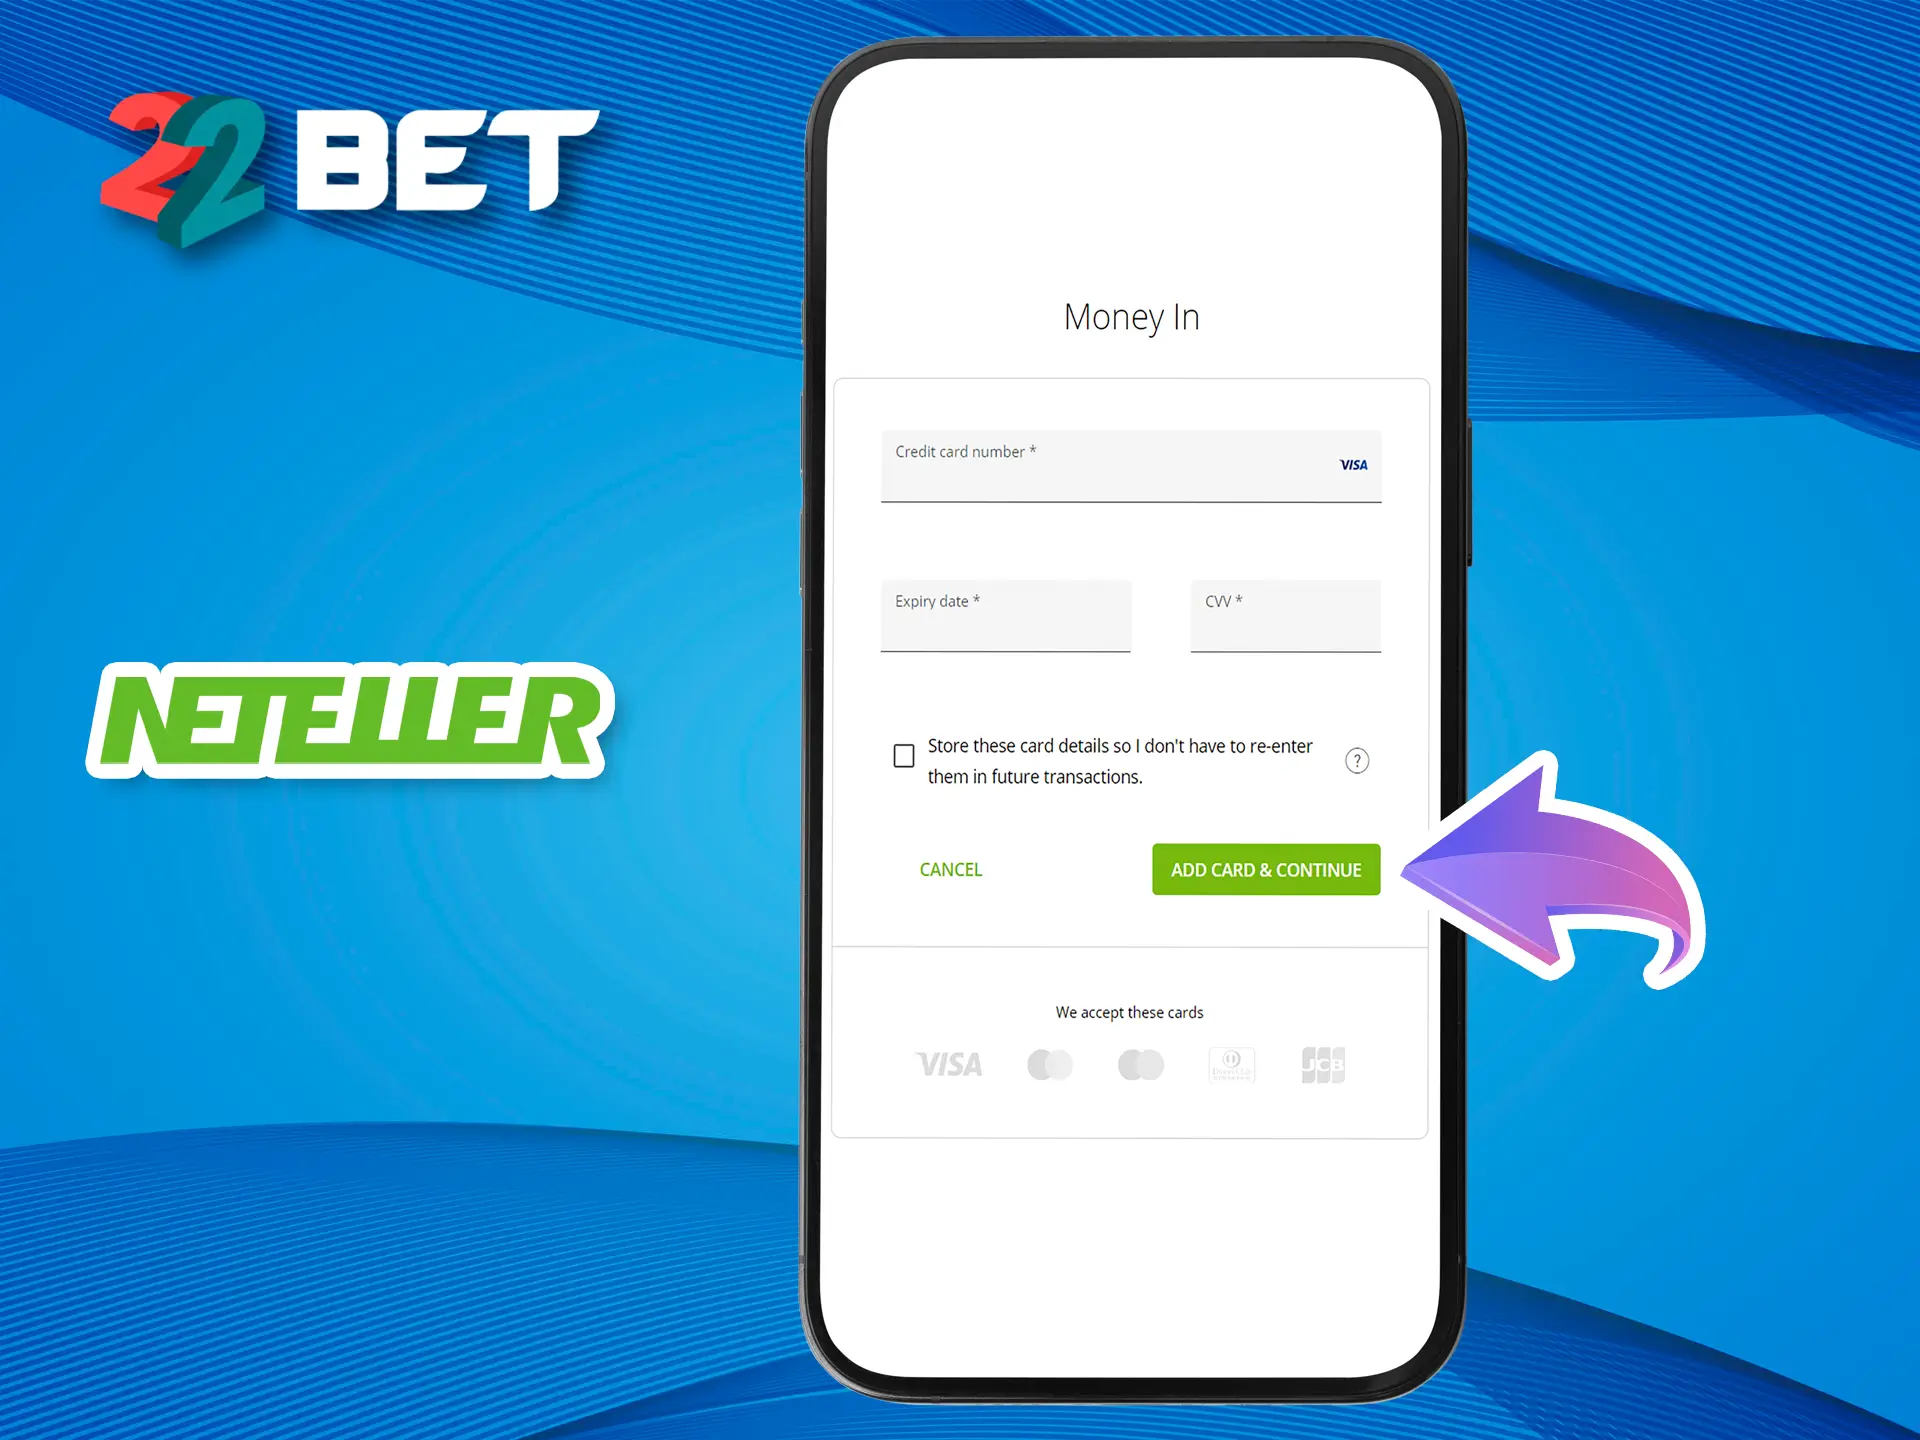 Link your card and make your first deposit to your Neteller wallet.